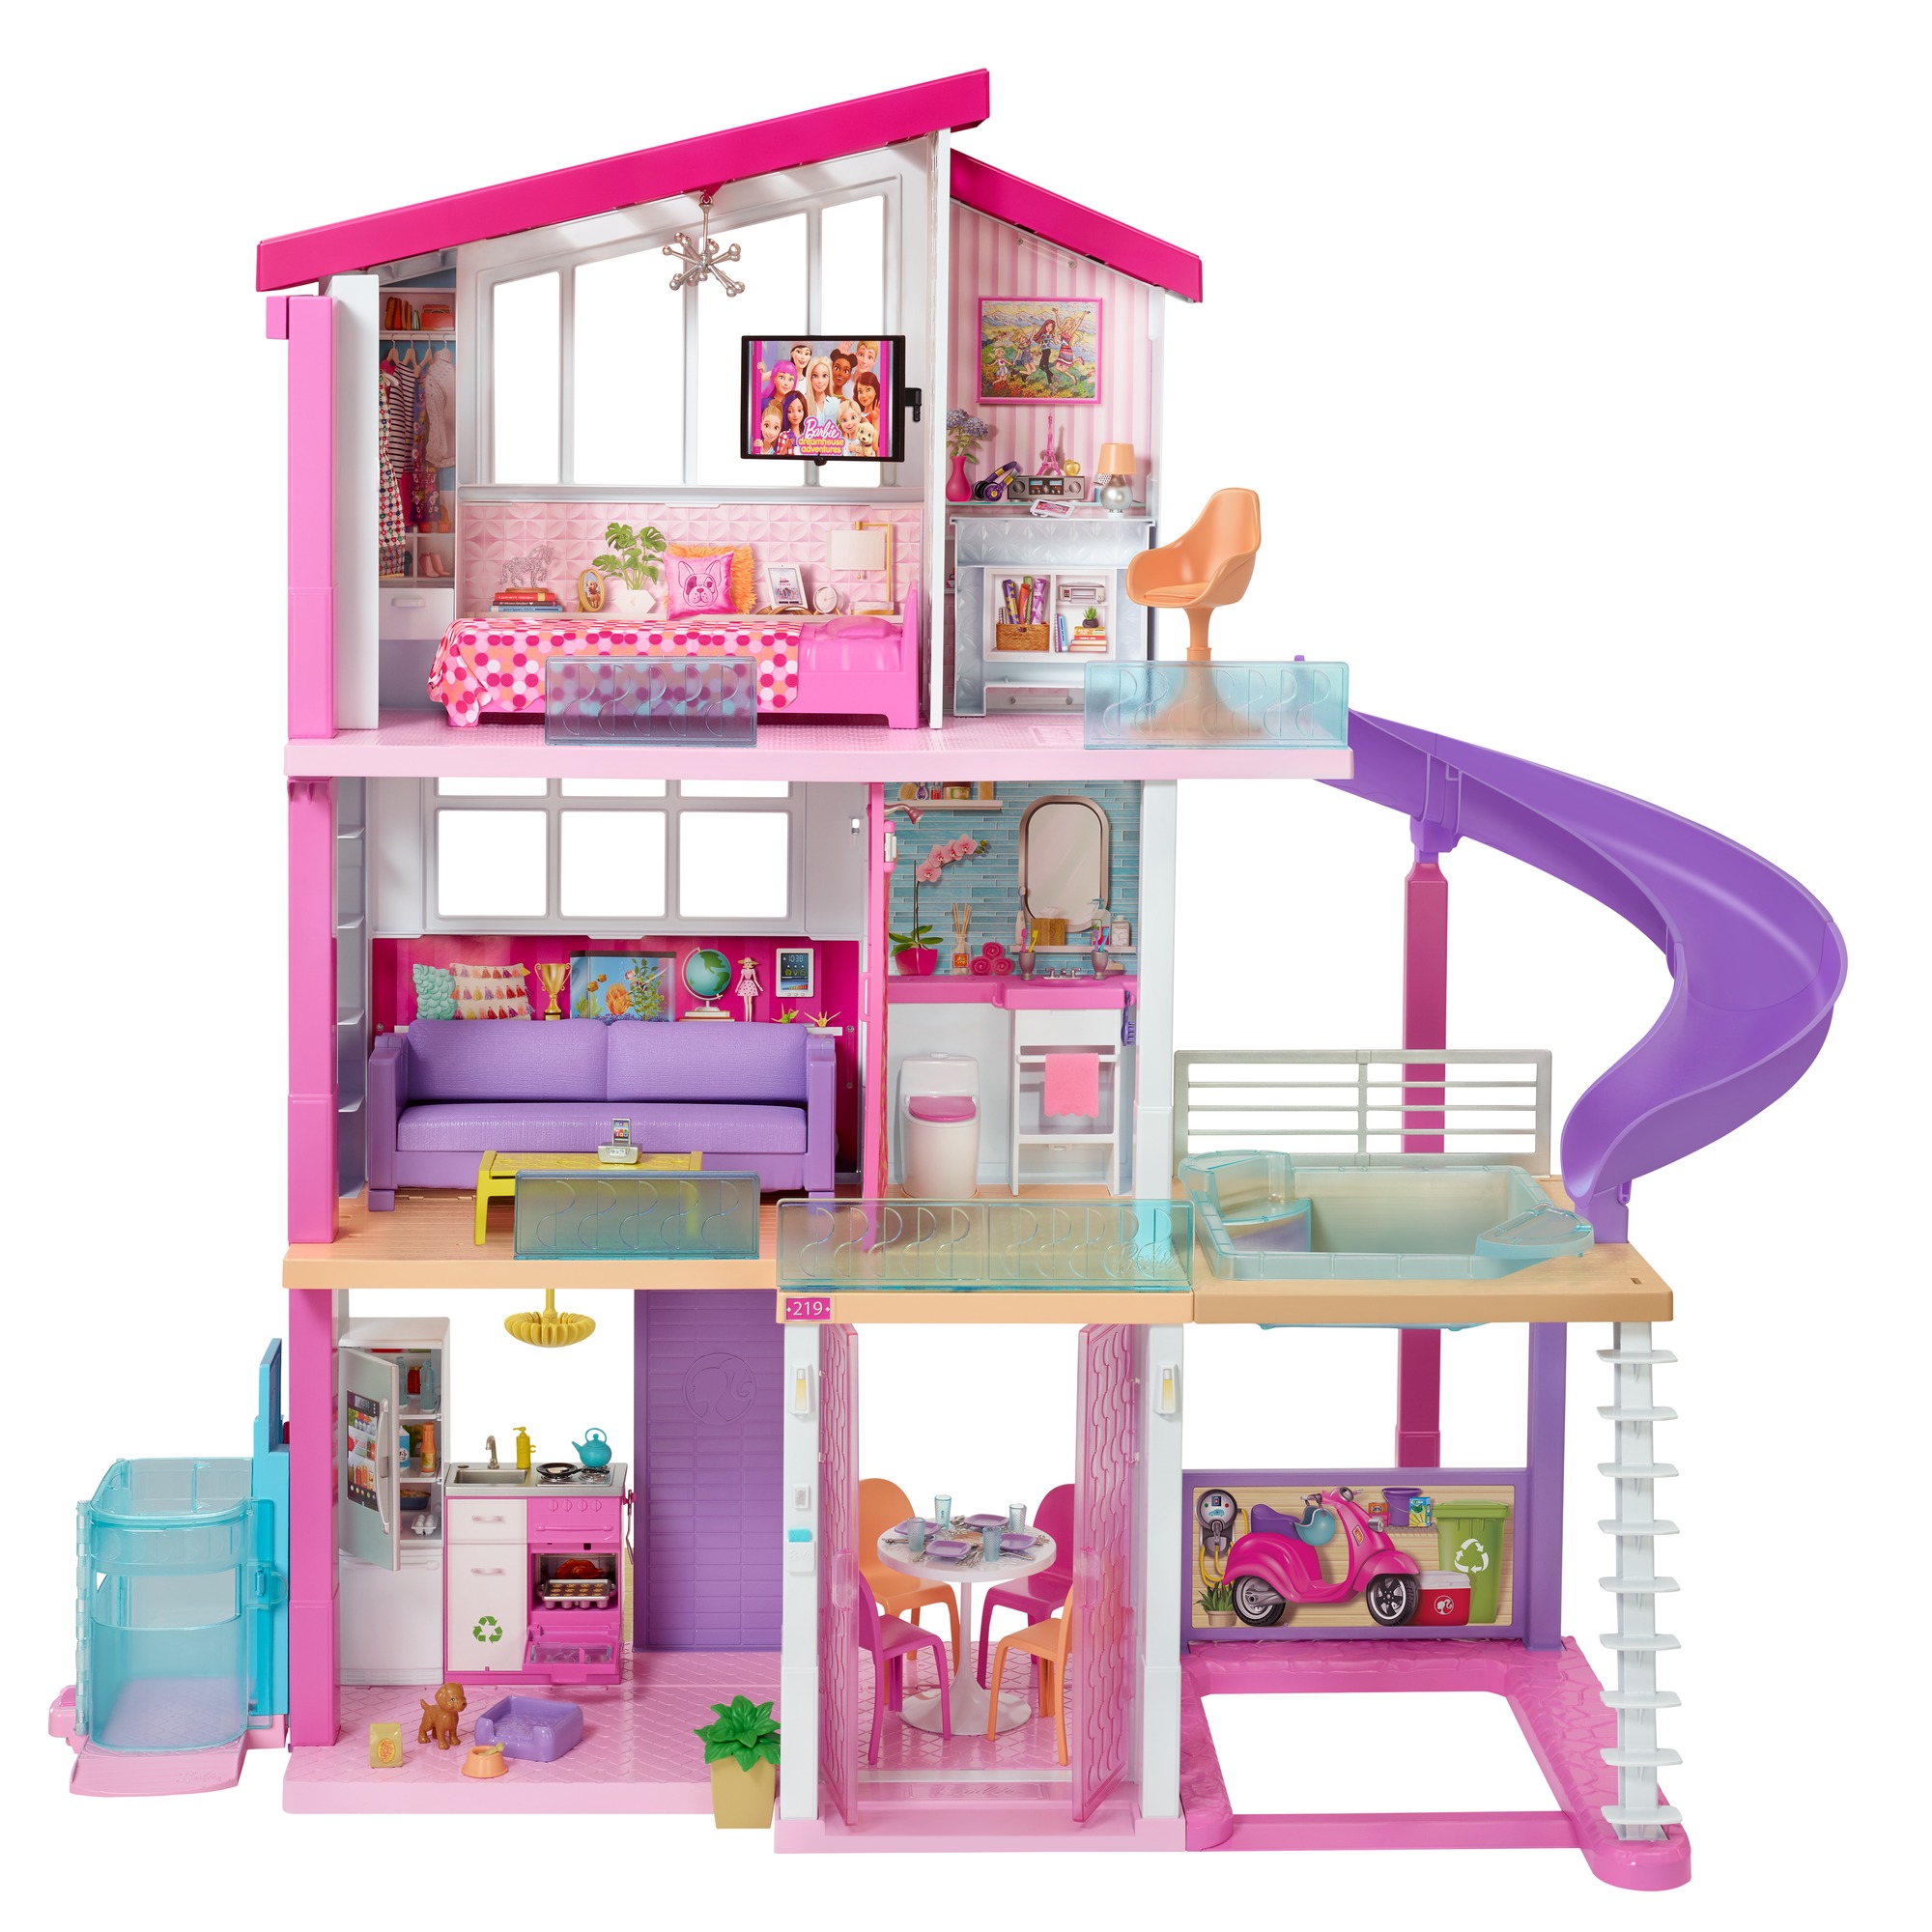 Barbie Dream House - Walmart  $30 - In store only and YMMV